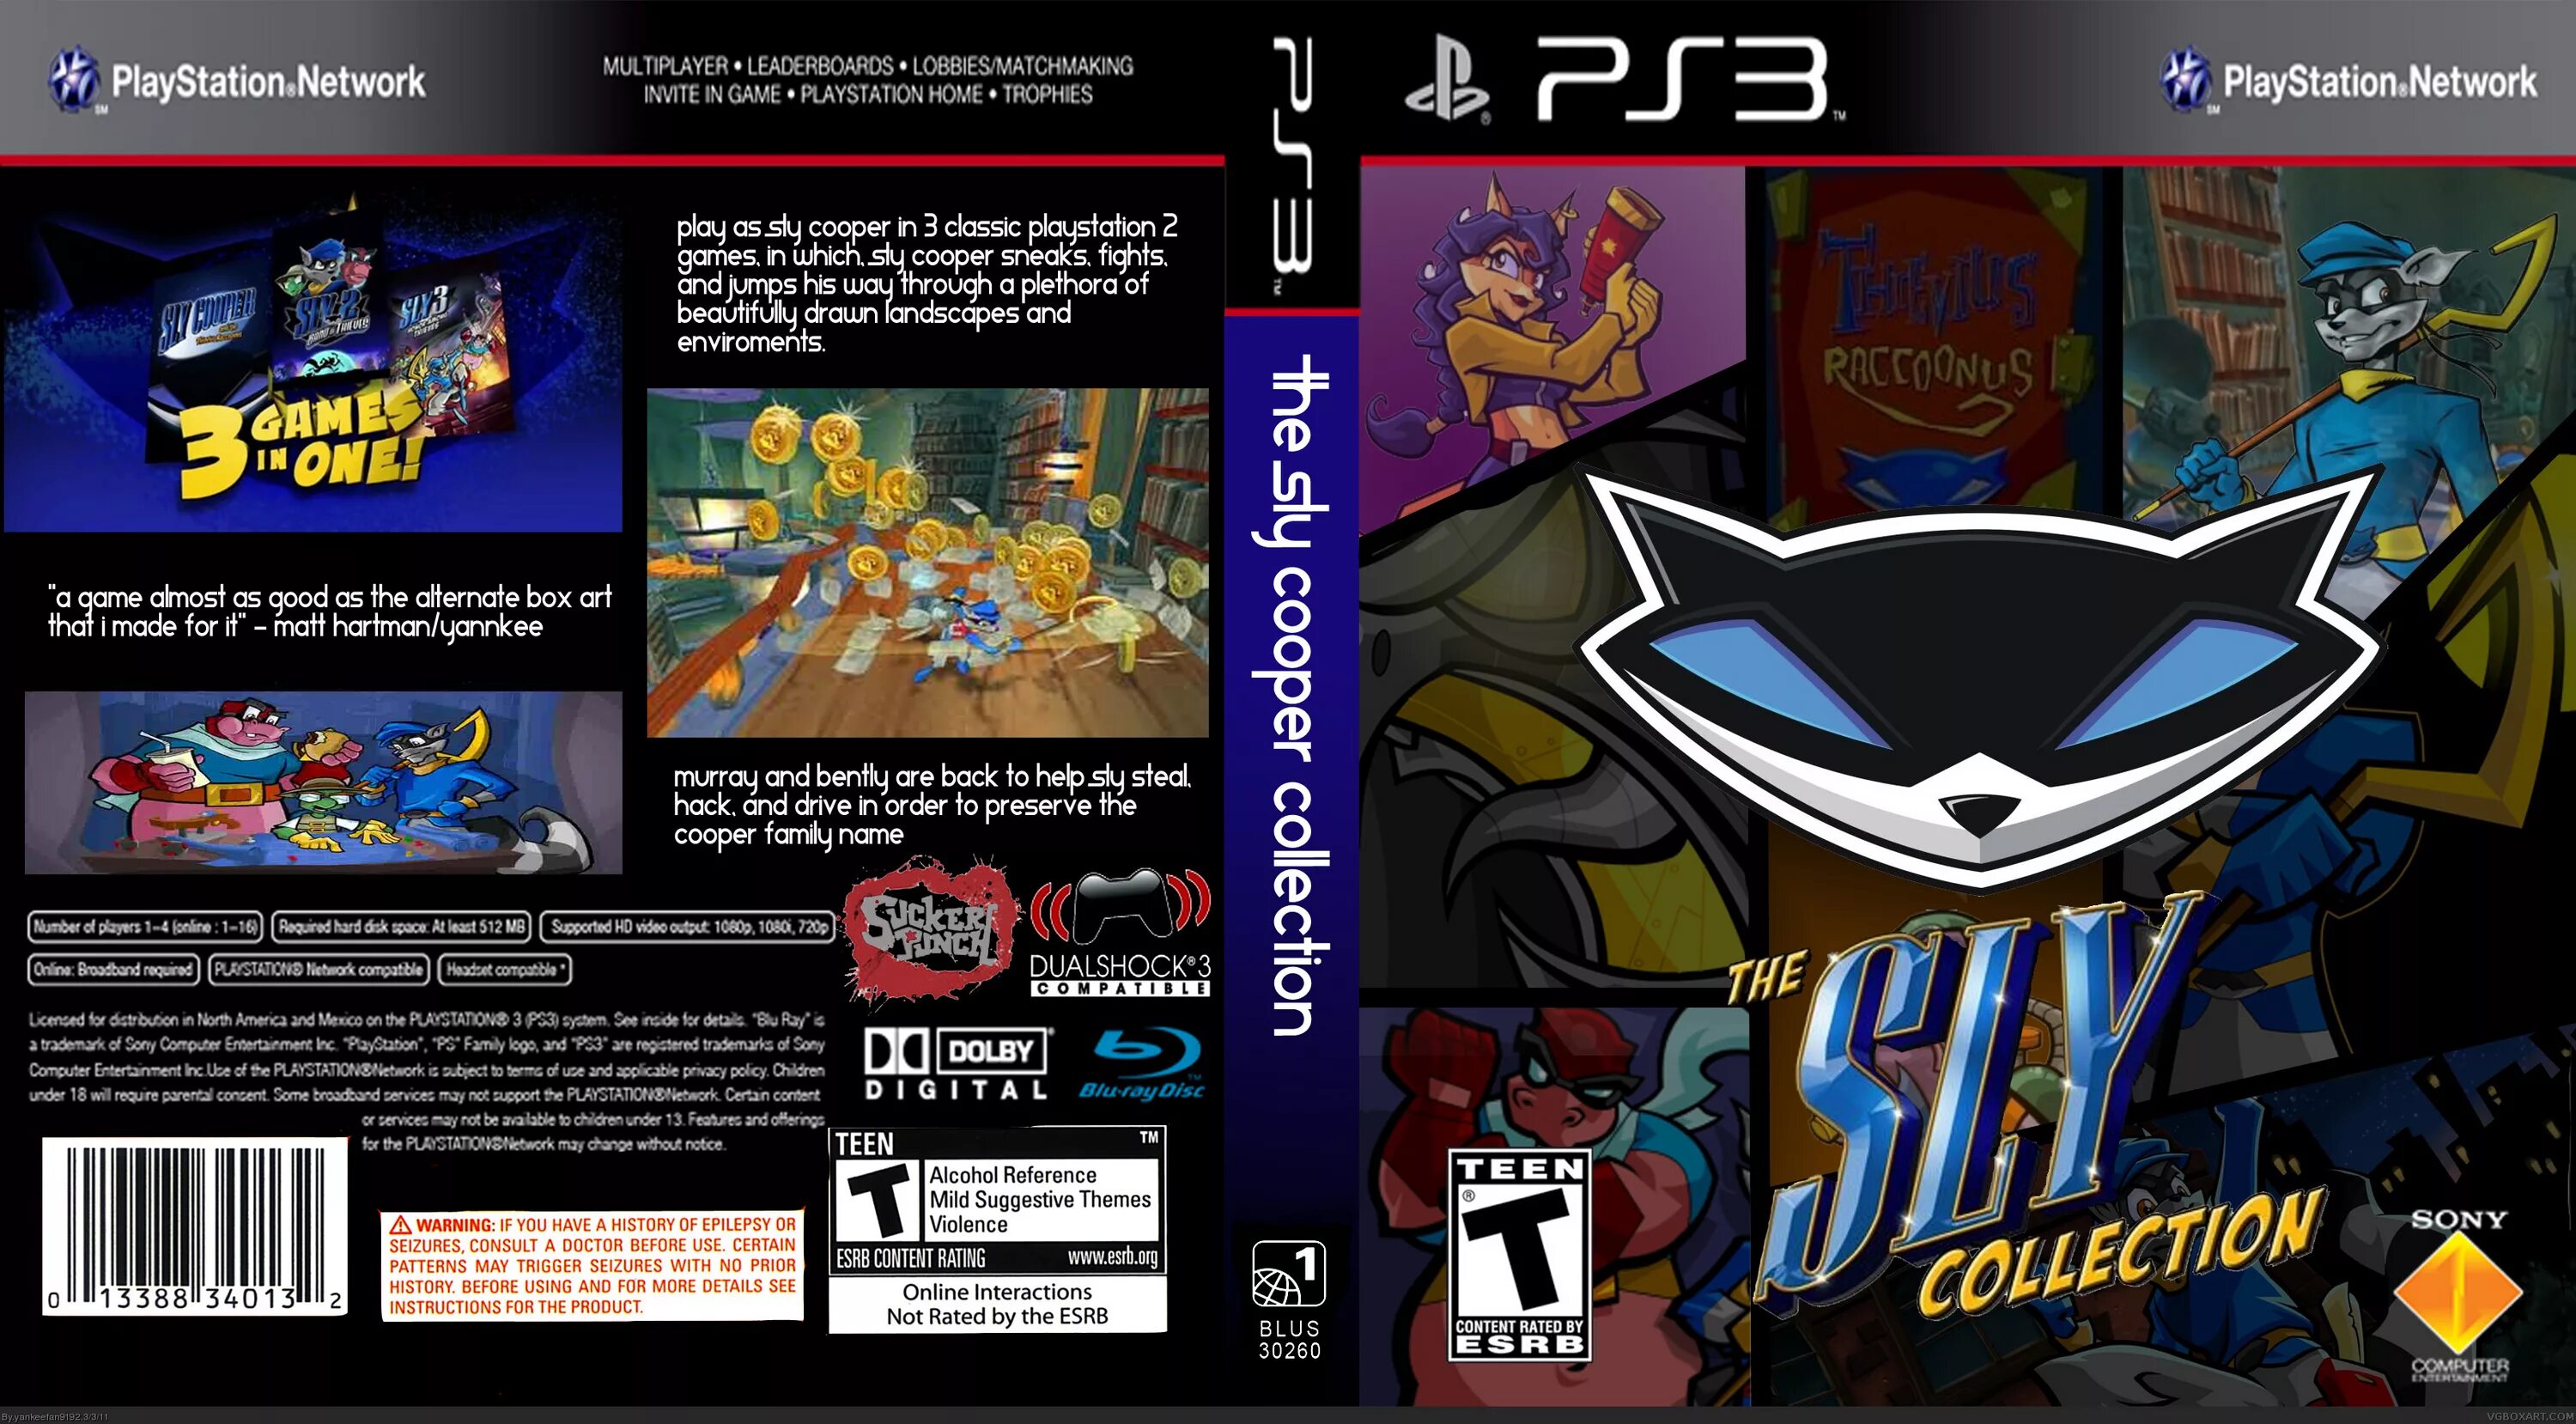 Sly ps3. Sly Cooper collection ps3 Covers. Слай Купер ps3. Sly Cooper Trilogy ps3 ISO. Sly Cooper игра на ps3.